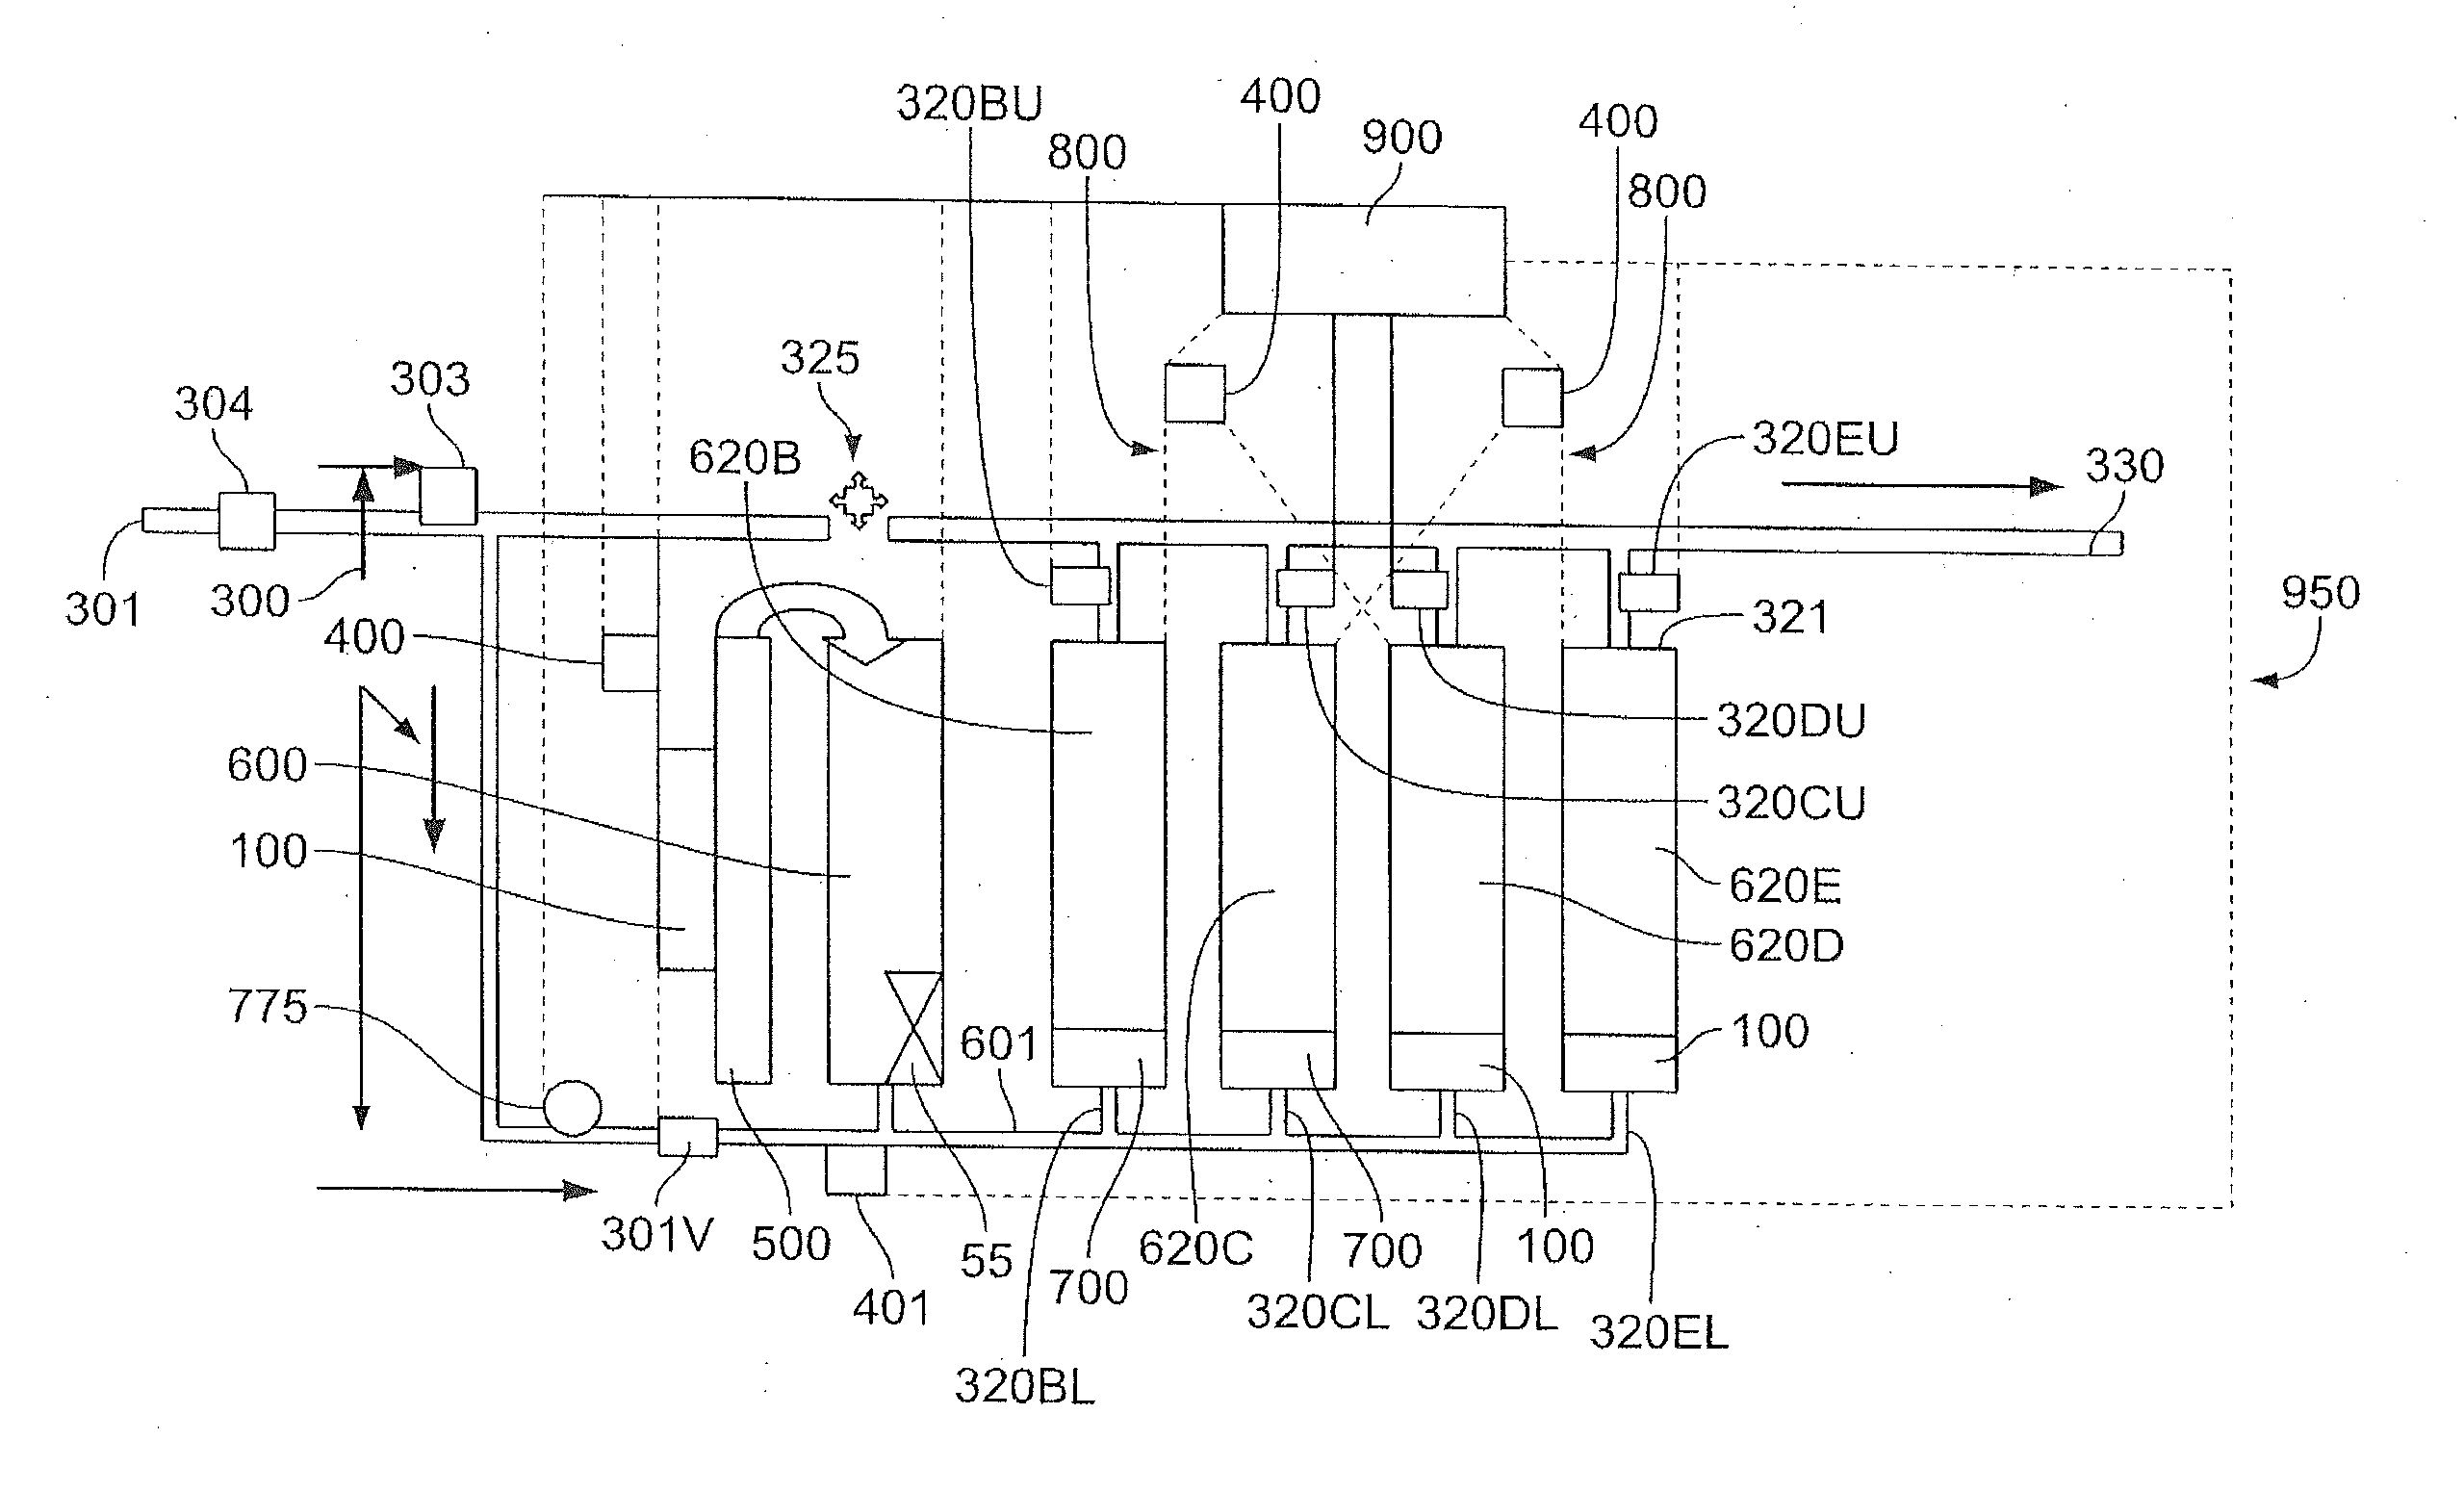 Modulating surface and aerosol iodine disinfectant system